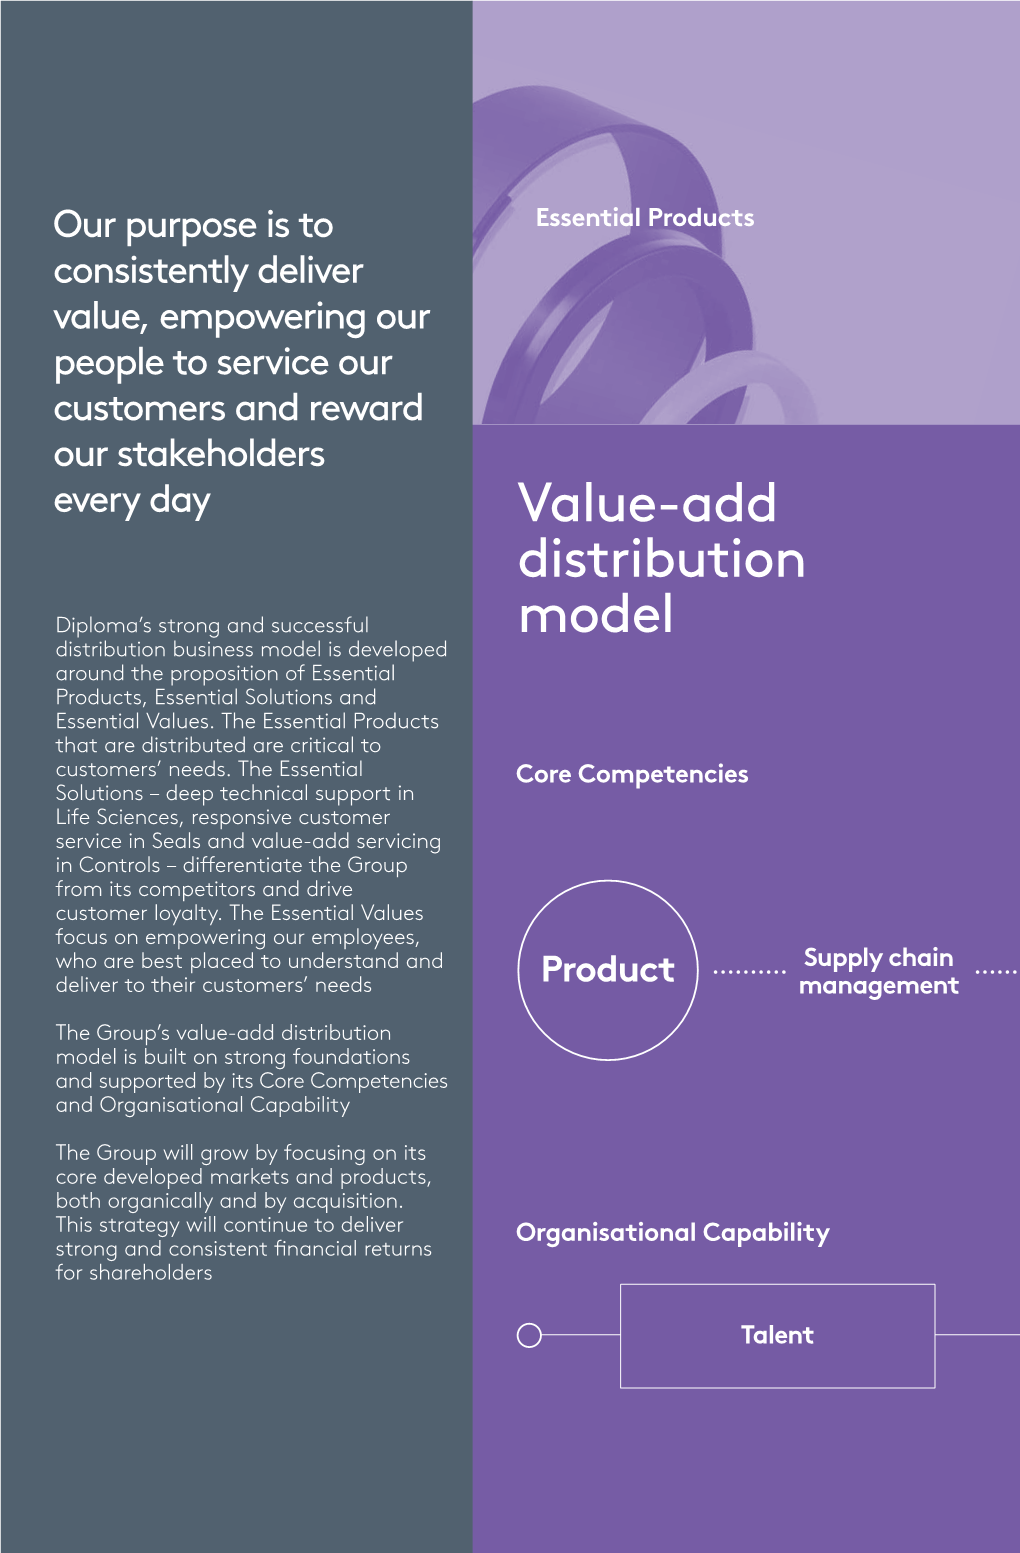 Value-Add Distribution Model Is Built on Strong Foundations and Supported by Its Core Competencies and Organisational Capability